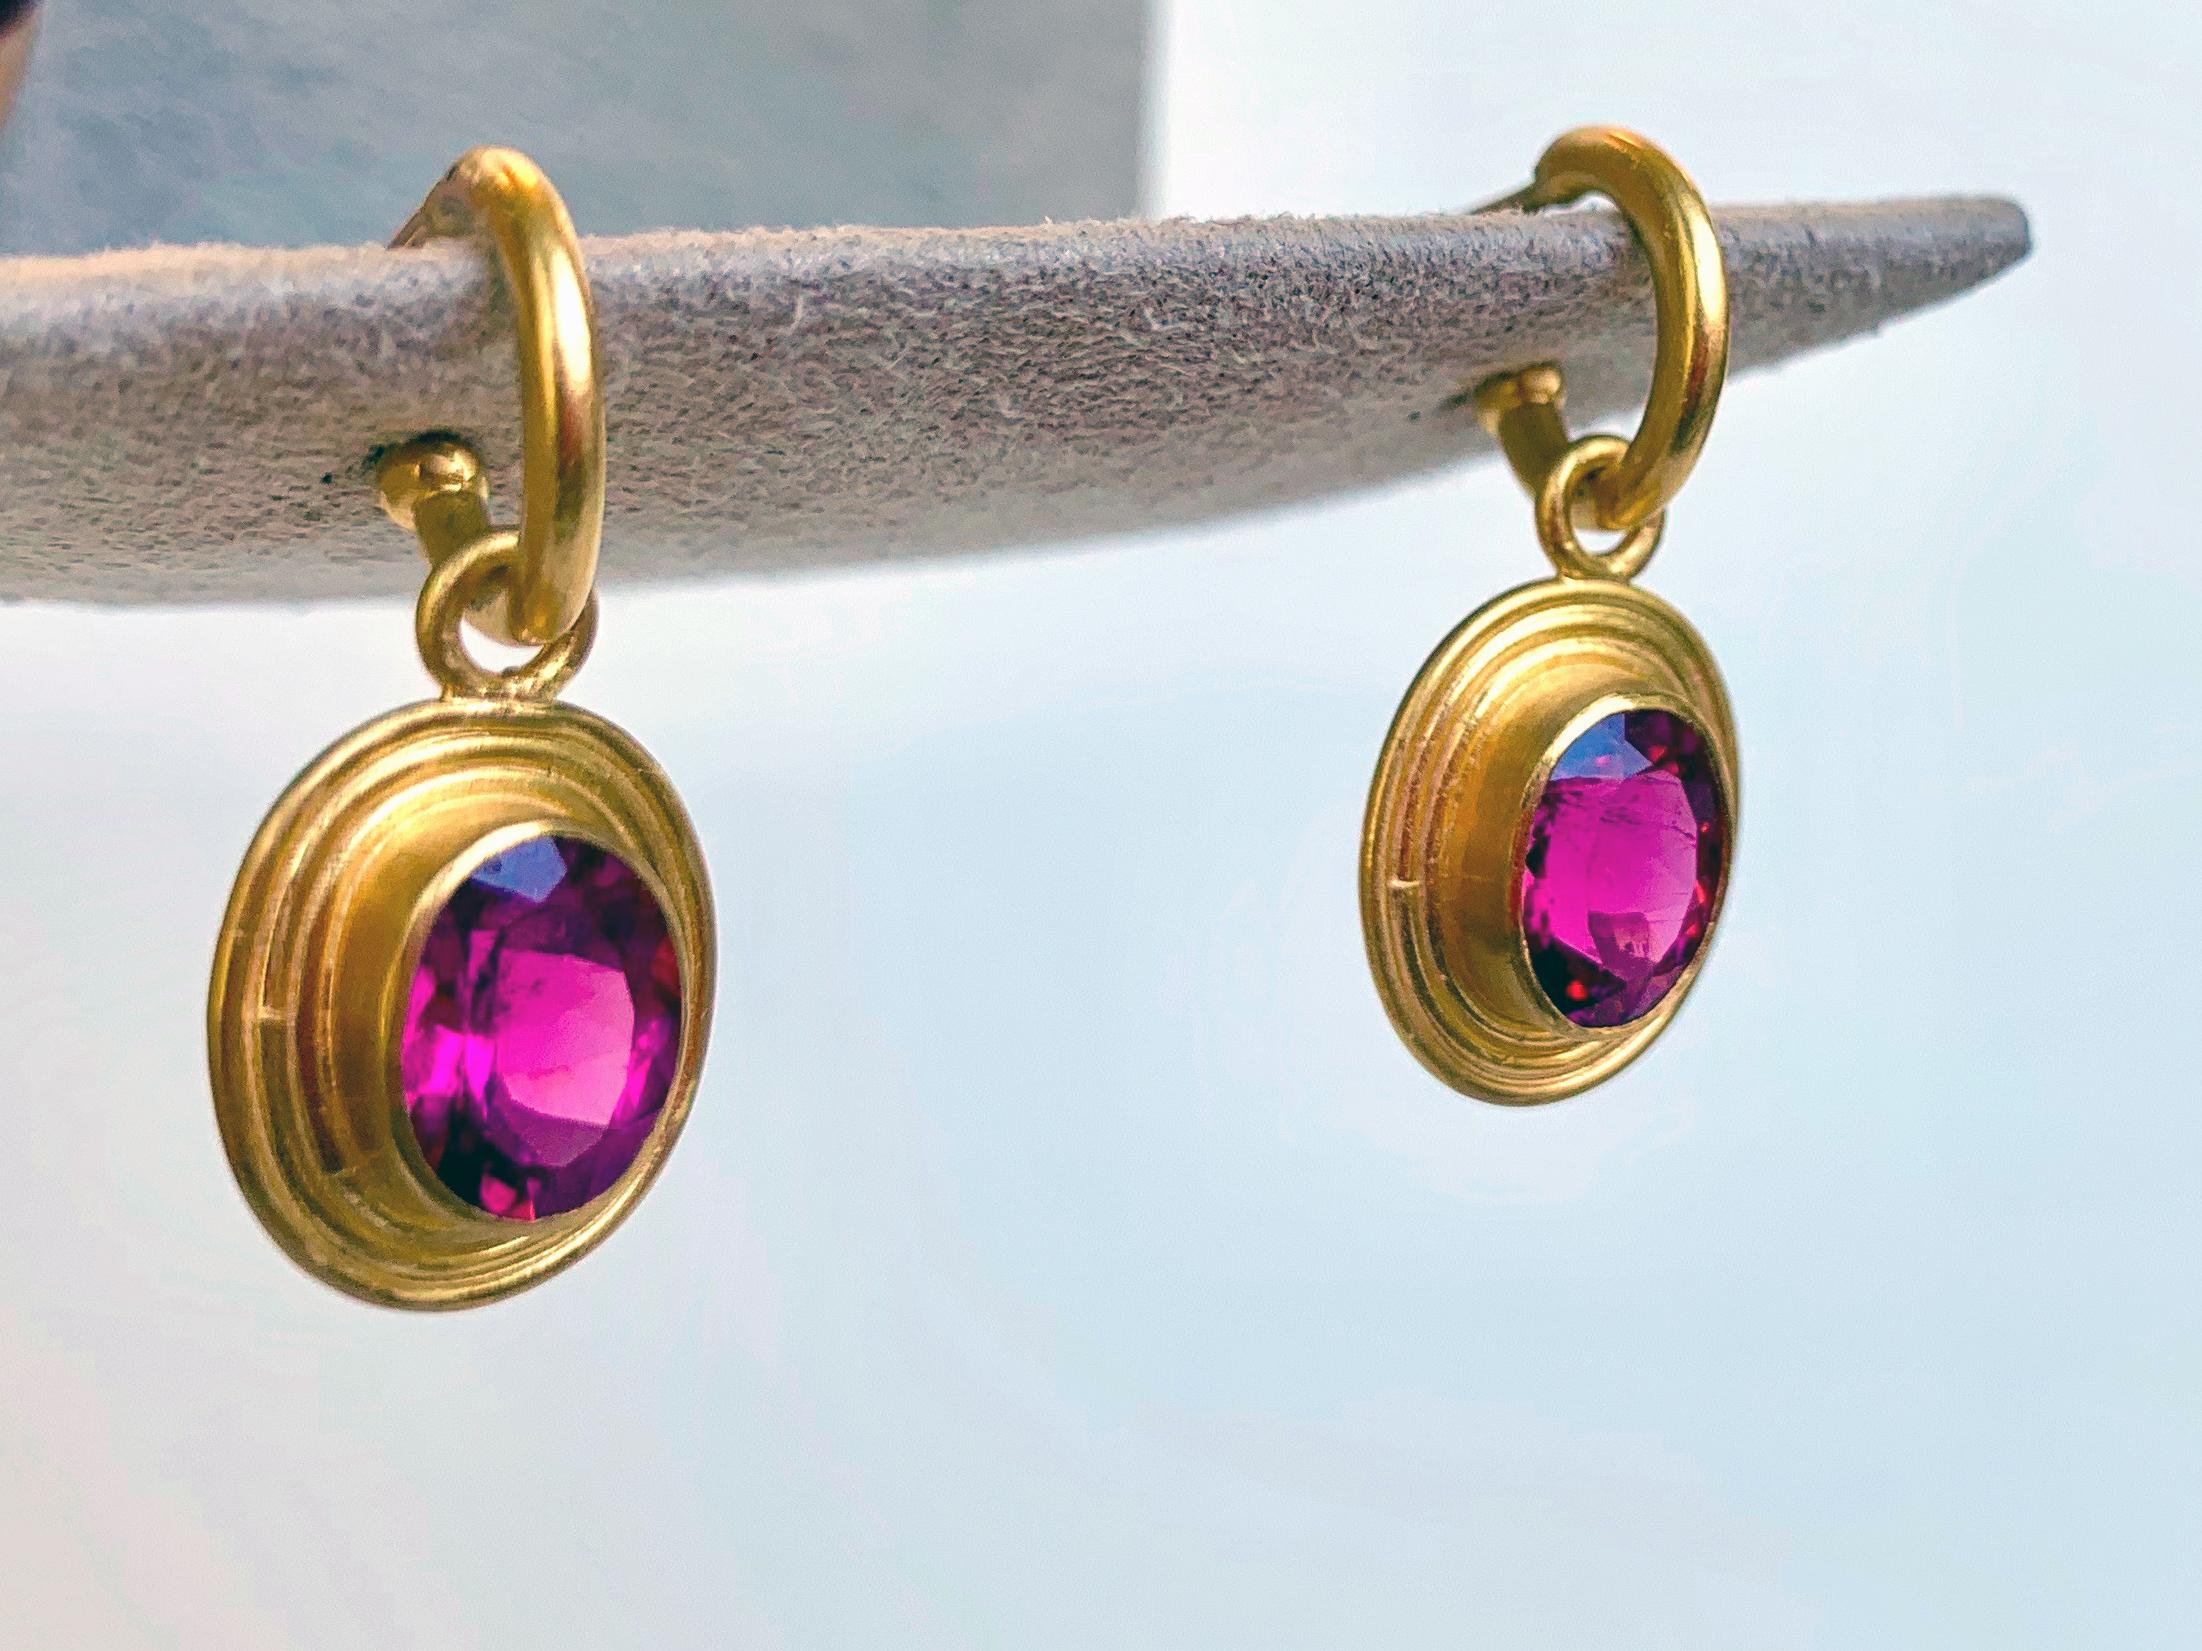 Stunning faceted rubellite stones totaling 3.86 carats are set in 22 karat gold round wires, inspired by ancient Roman jewelry design. hang on a 22 Karat gold hoop. Rubellite is a part of the Tourmaline family, ranging from pinks to 